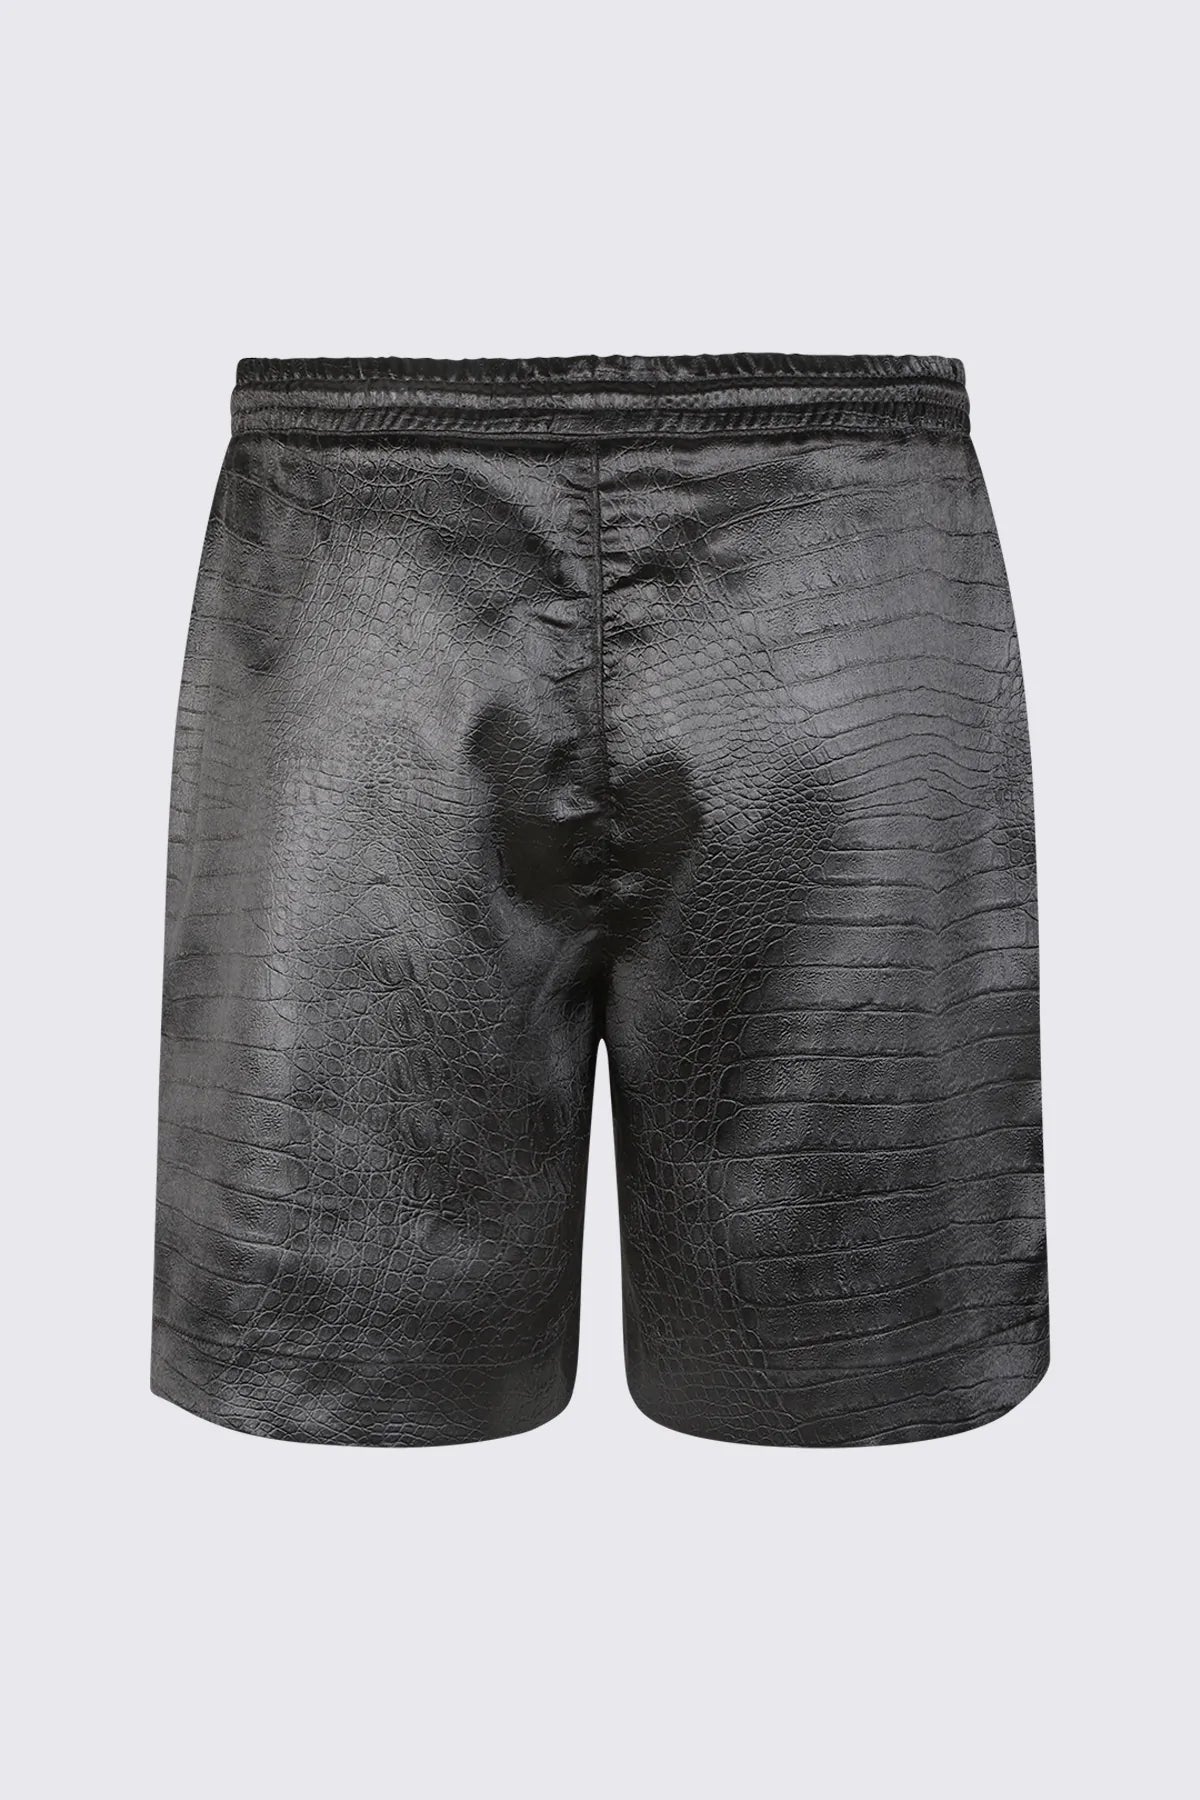 CLYDE CLASSIC SHORTS